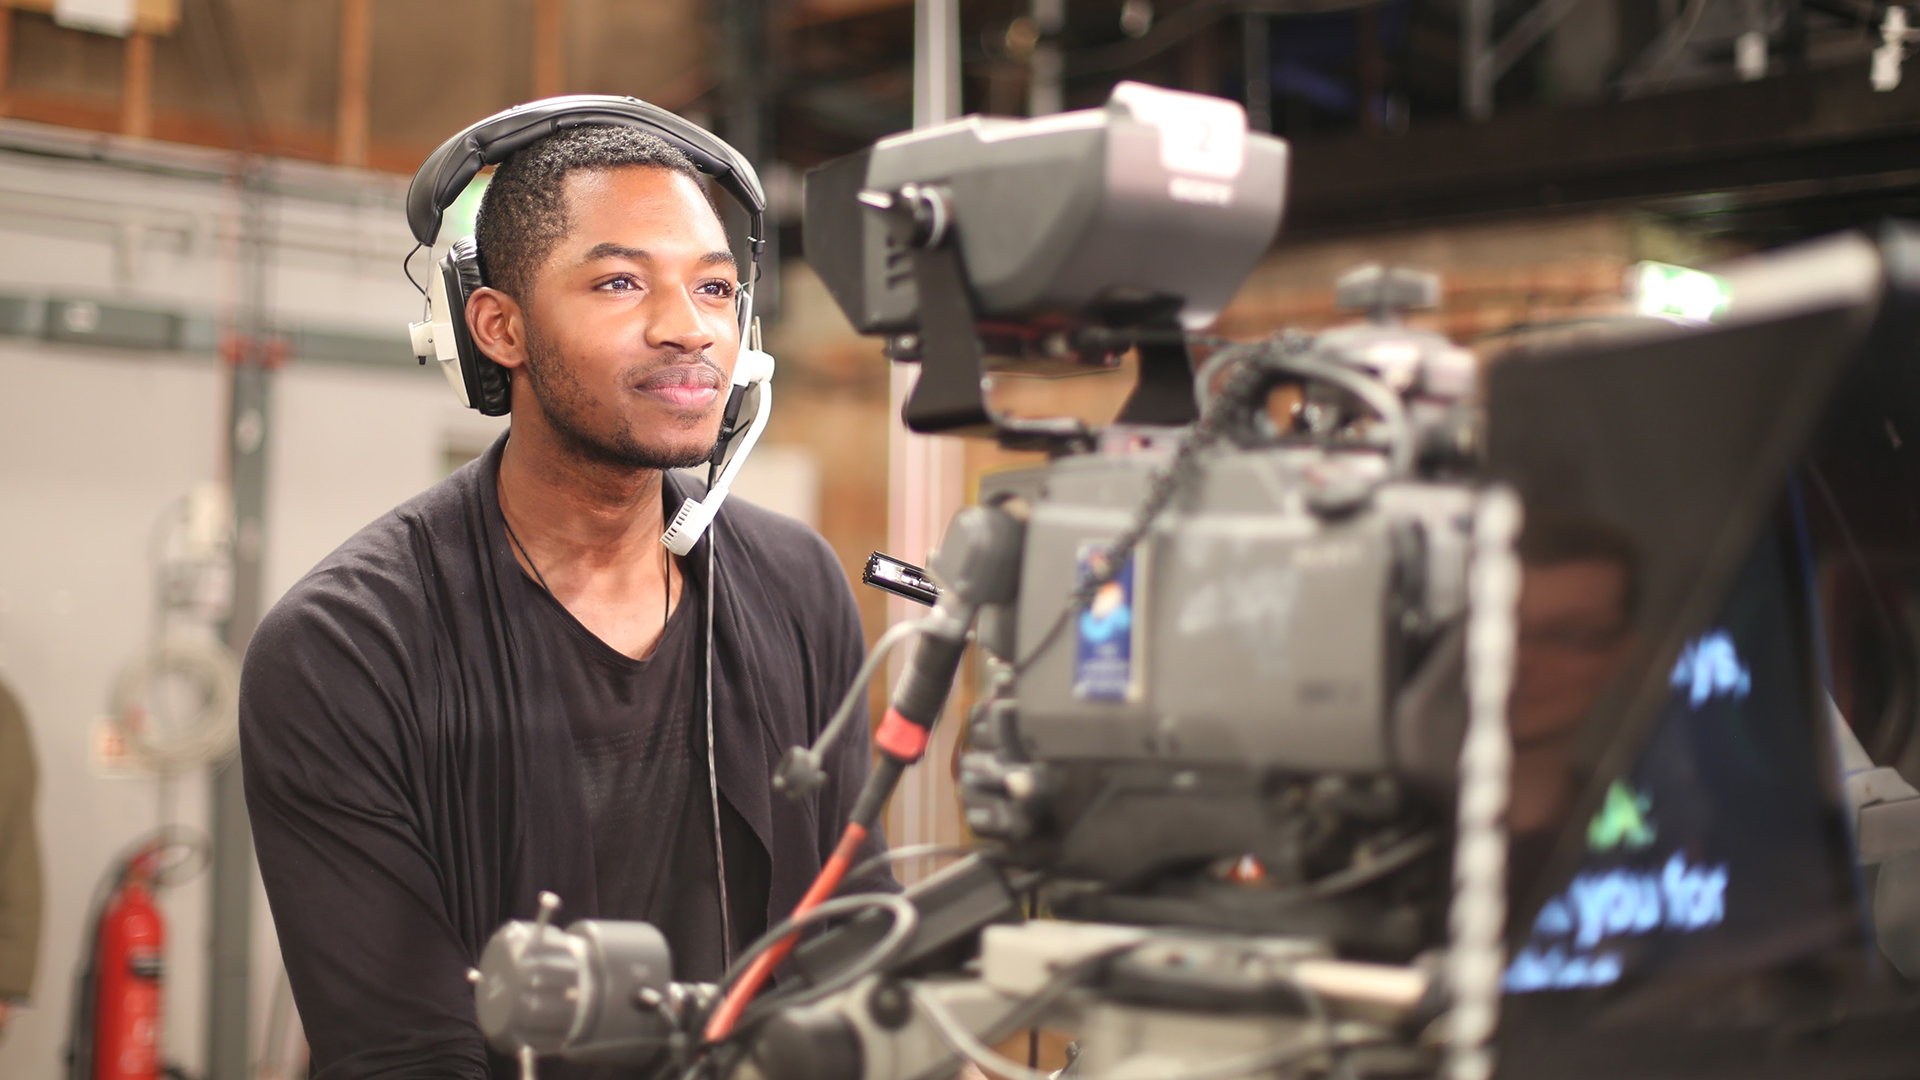 Student working behind camera on television show